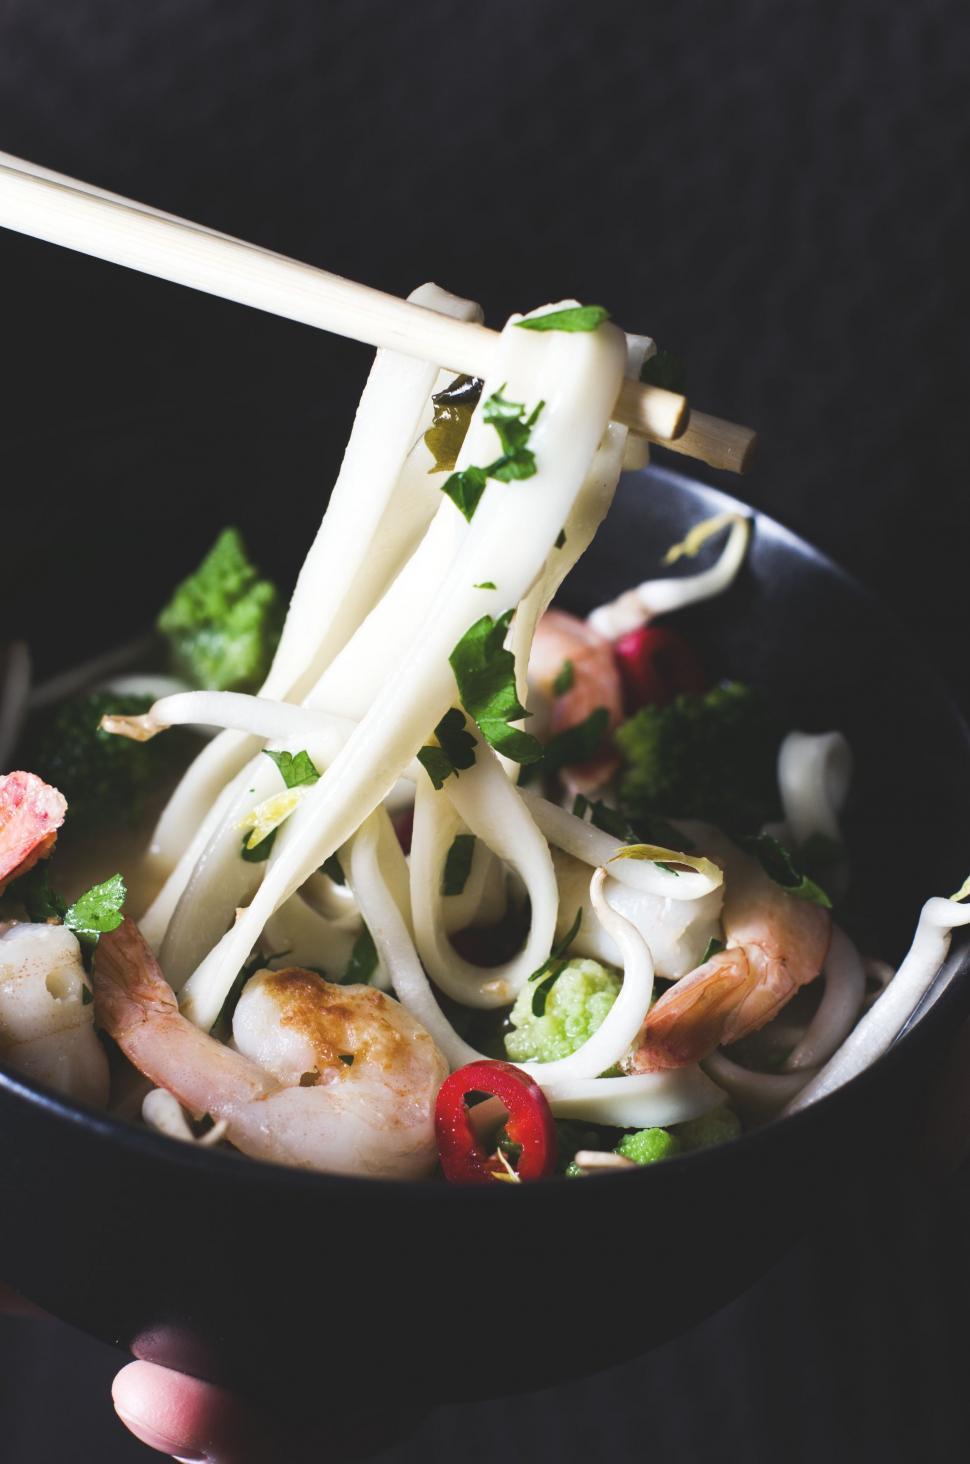 Free Image of Person Holding Bowl of Food With Chopsticks 